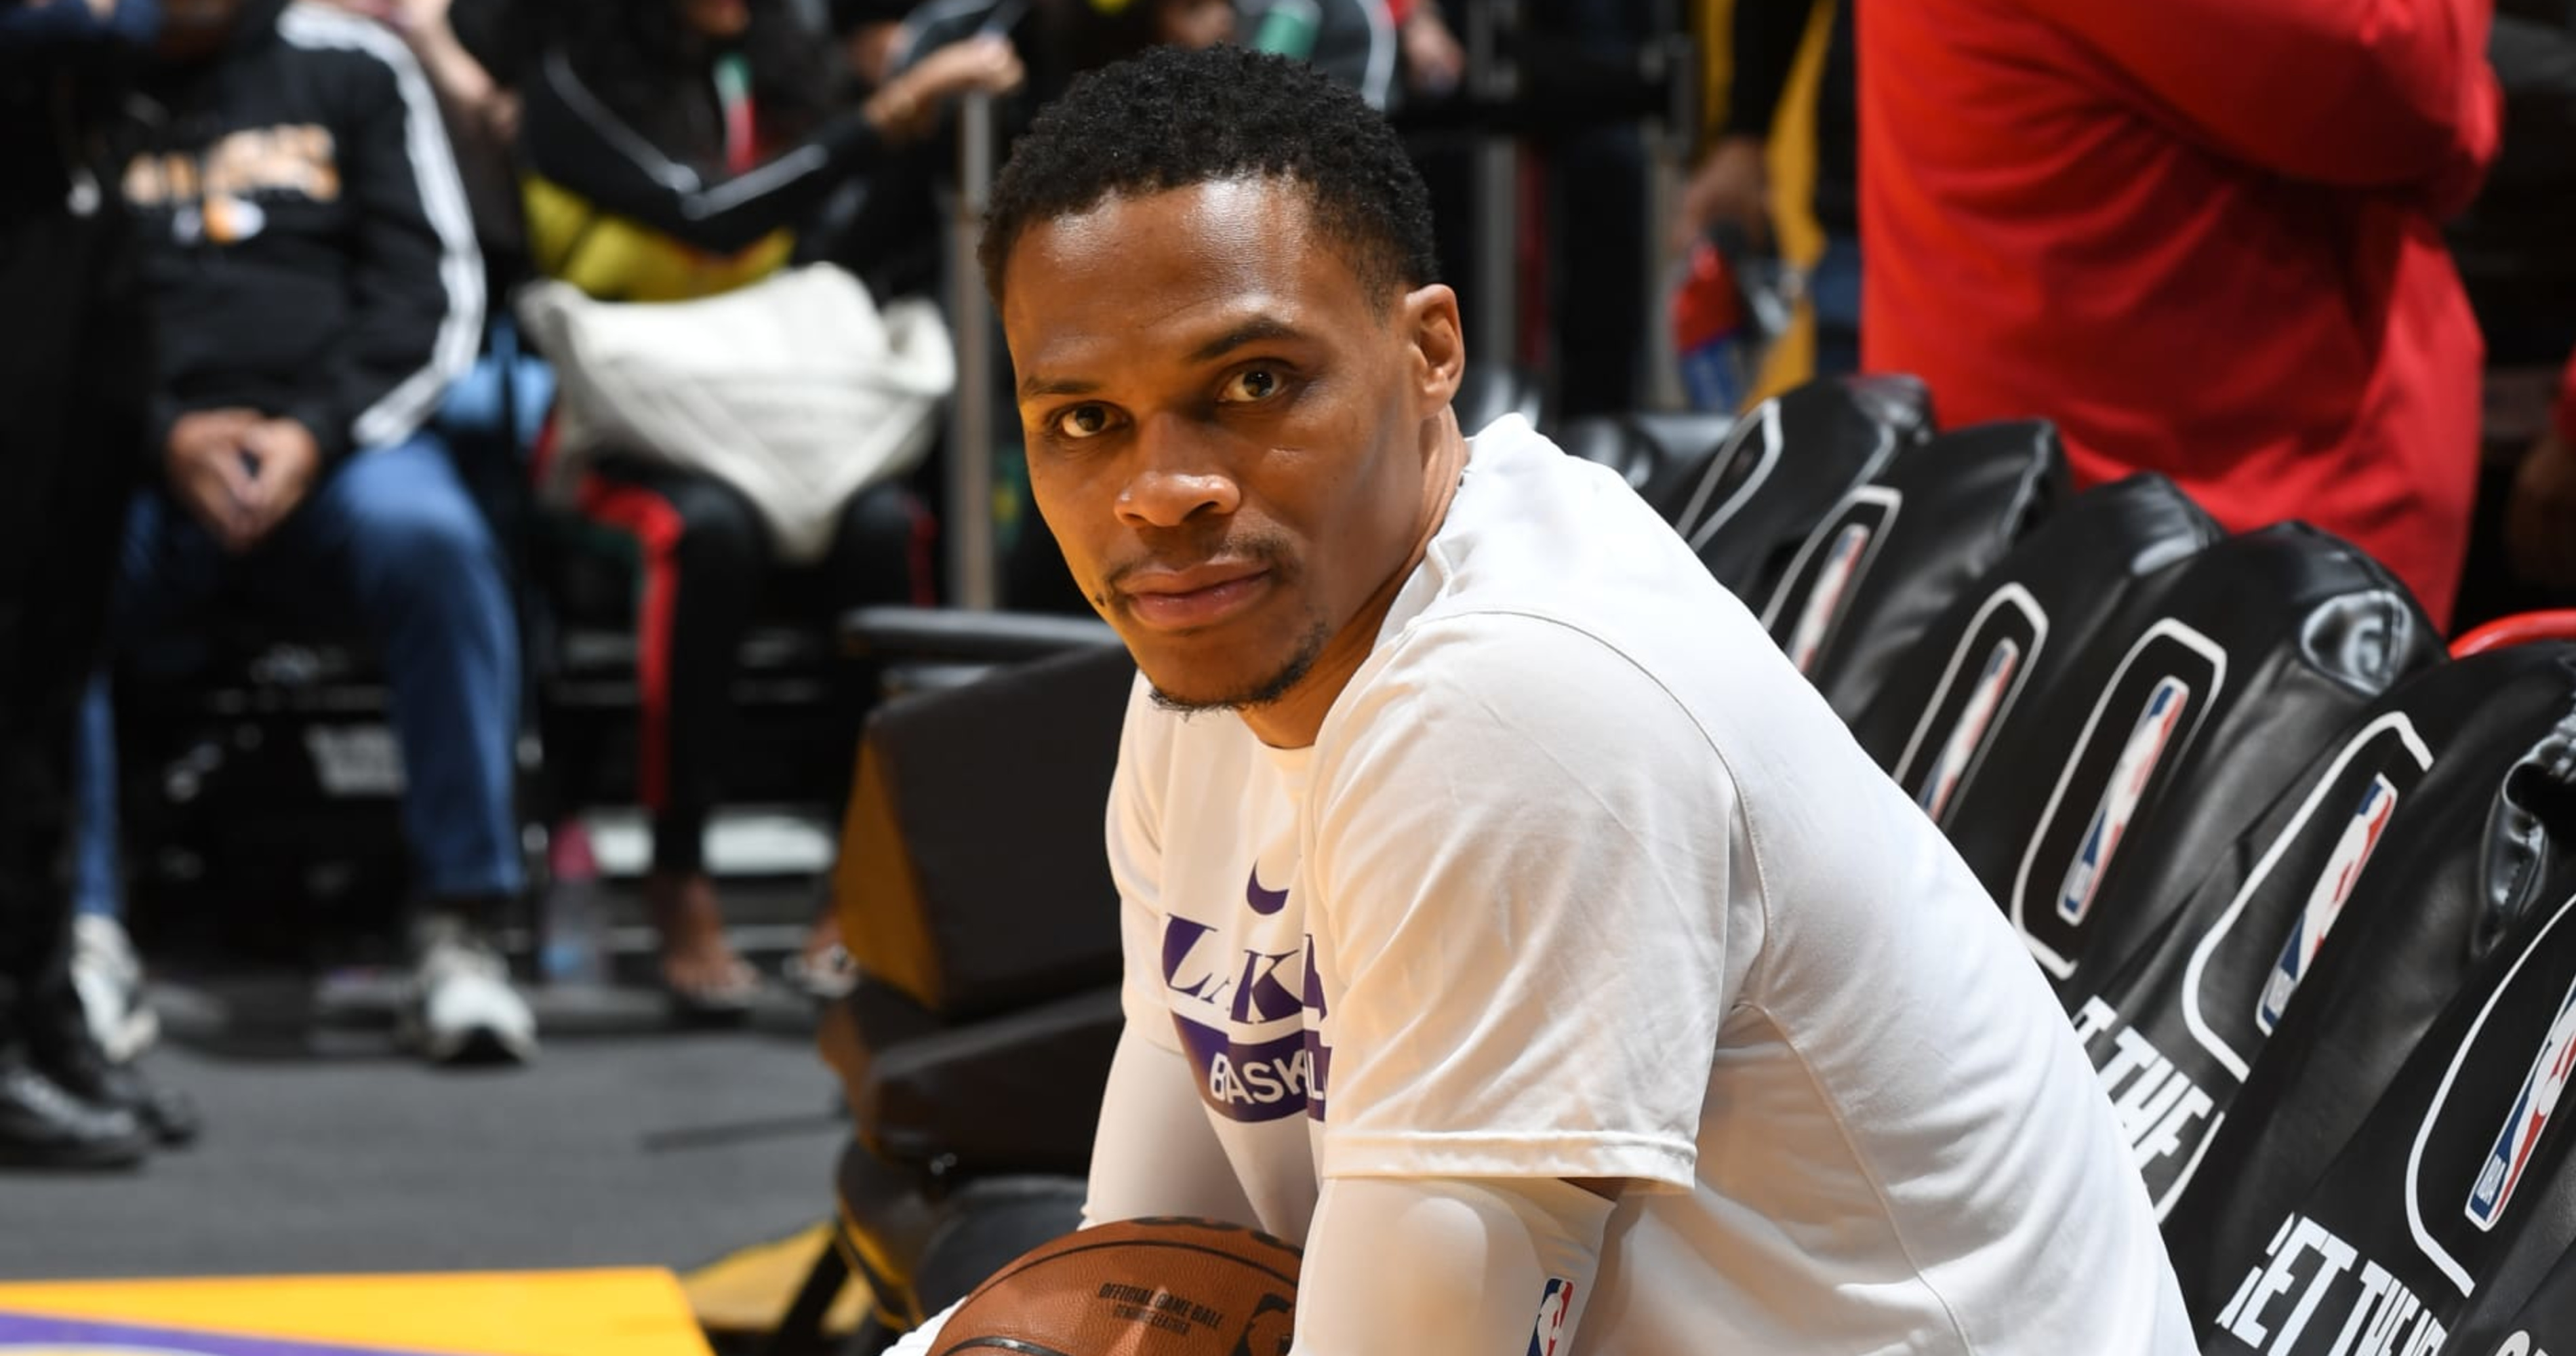 Lakers Rumors: Russell Westbrook Less Likely to Be Traded amid Play as 6th Man